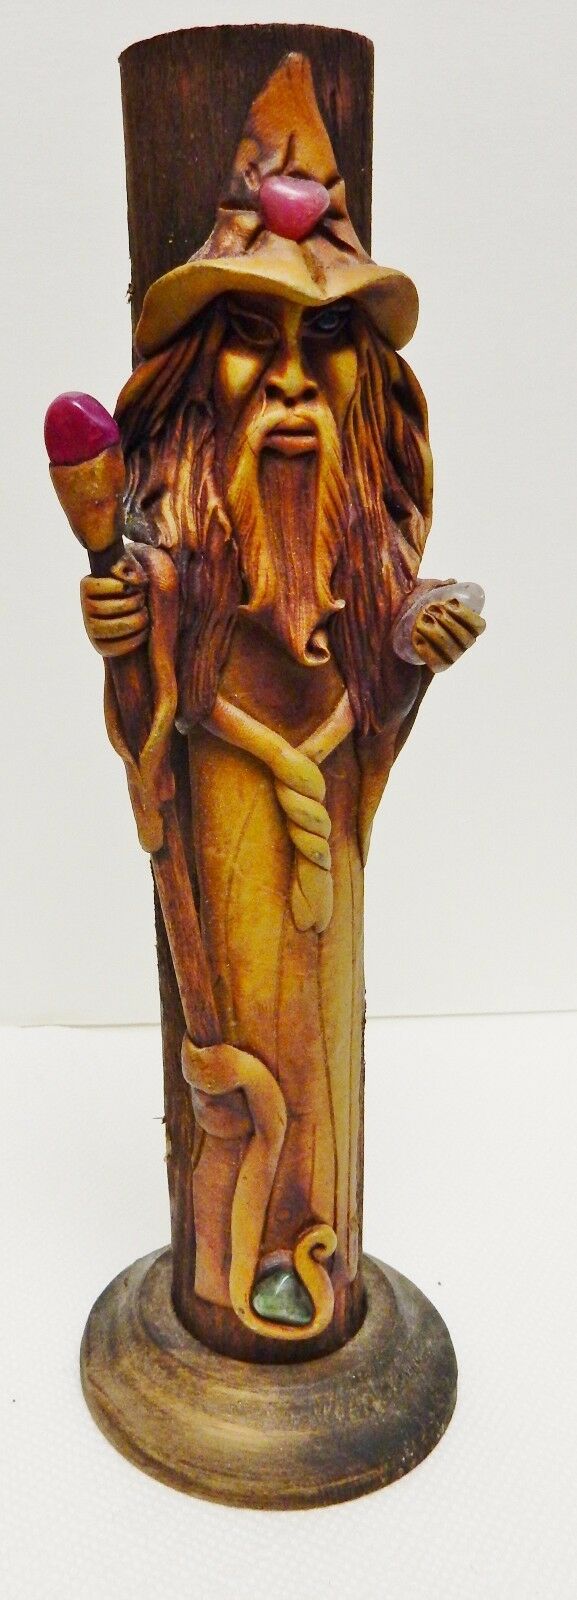 Vintage Wood Wizard Pipe Flute Sorcerer Hand Crafted Gem Stones W Stand 10.25"